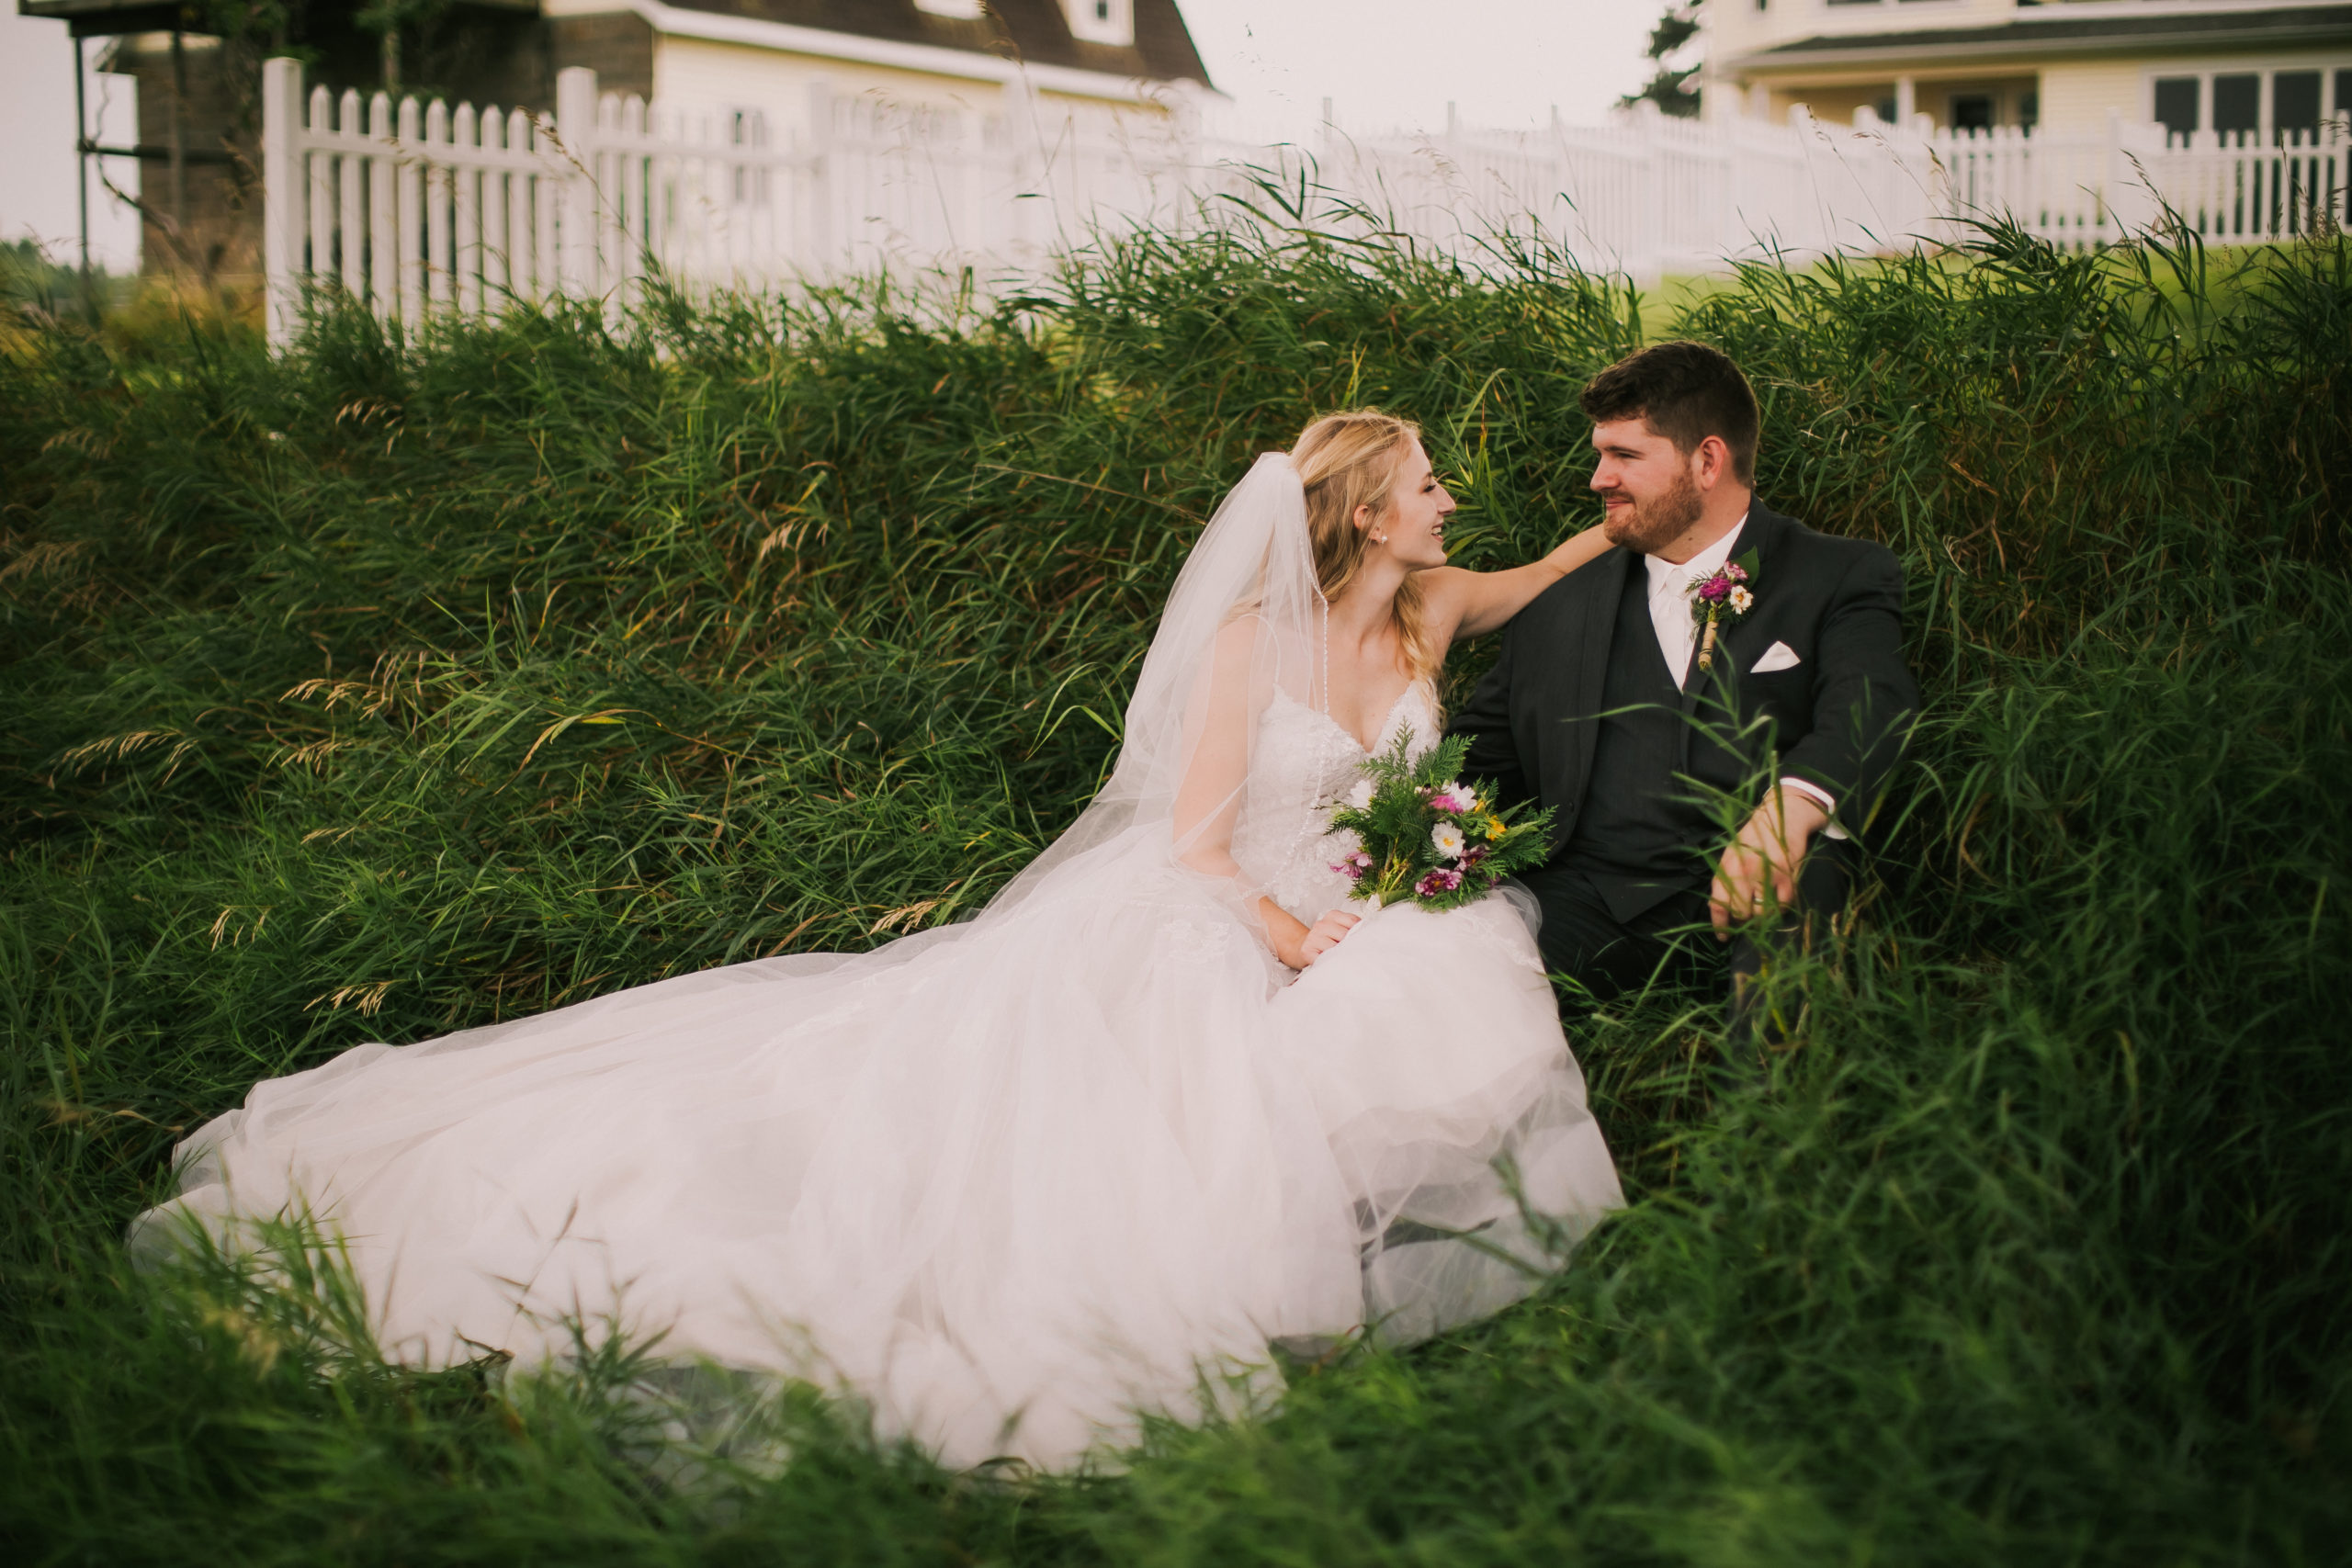 A bride and groom sit in the grass talking to each other